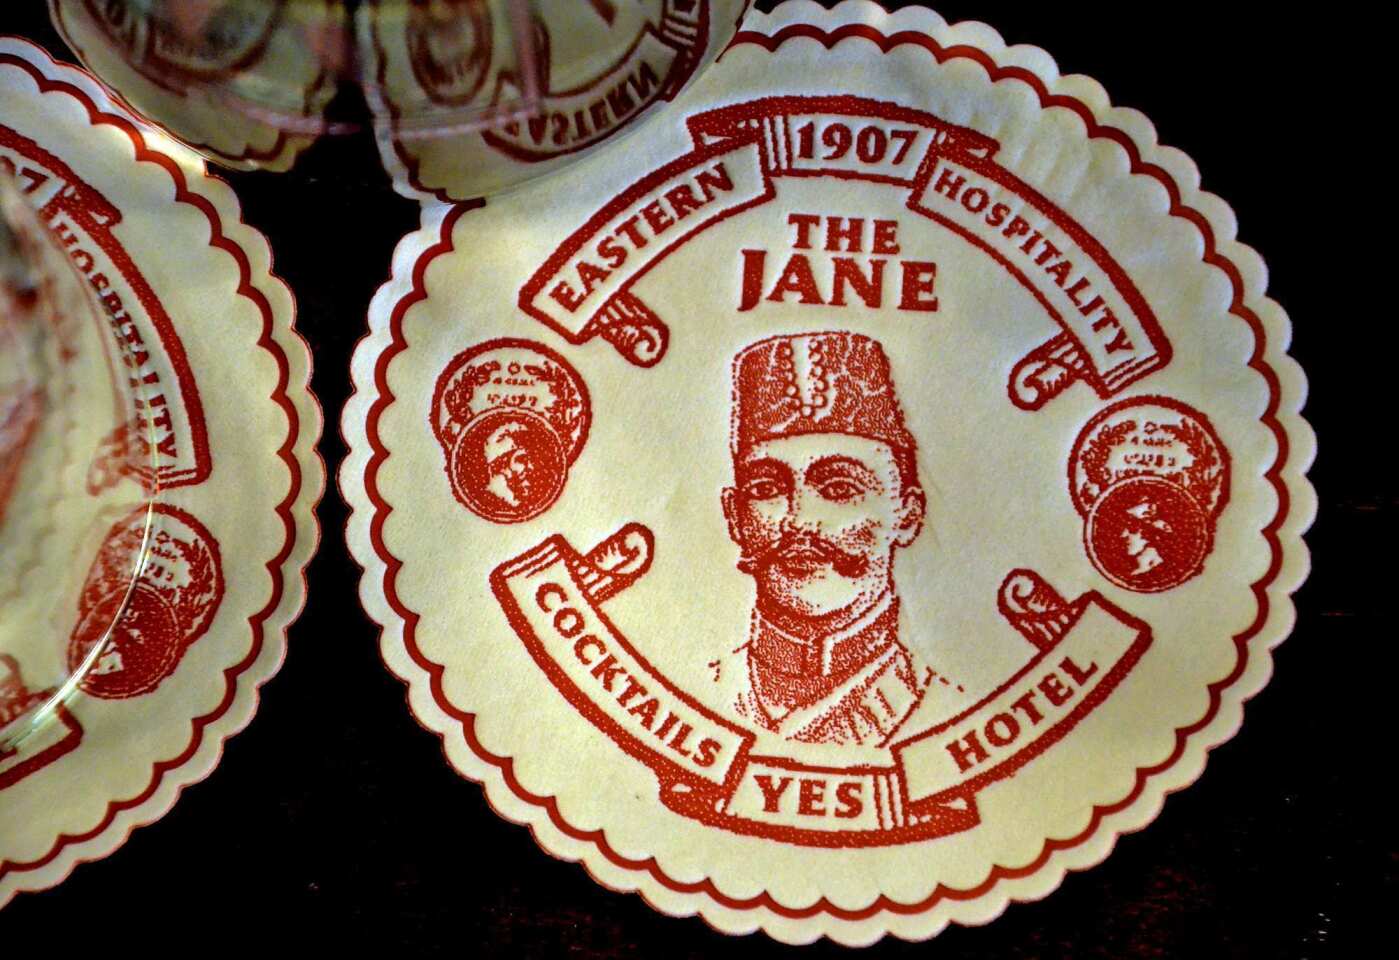 A coaster at the Jane hotel.